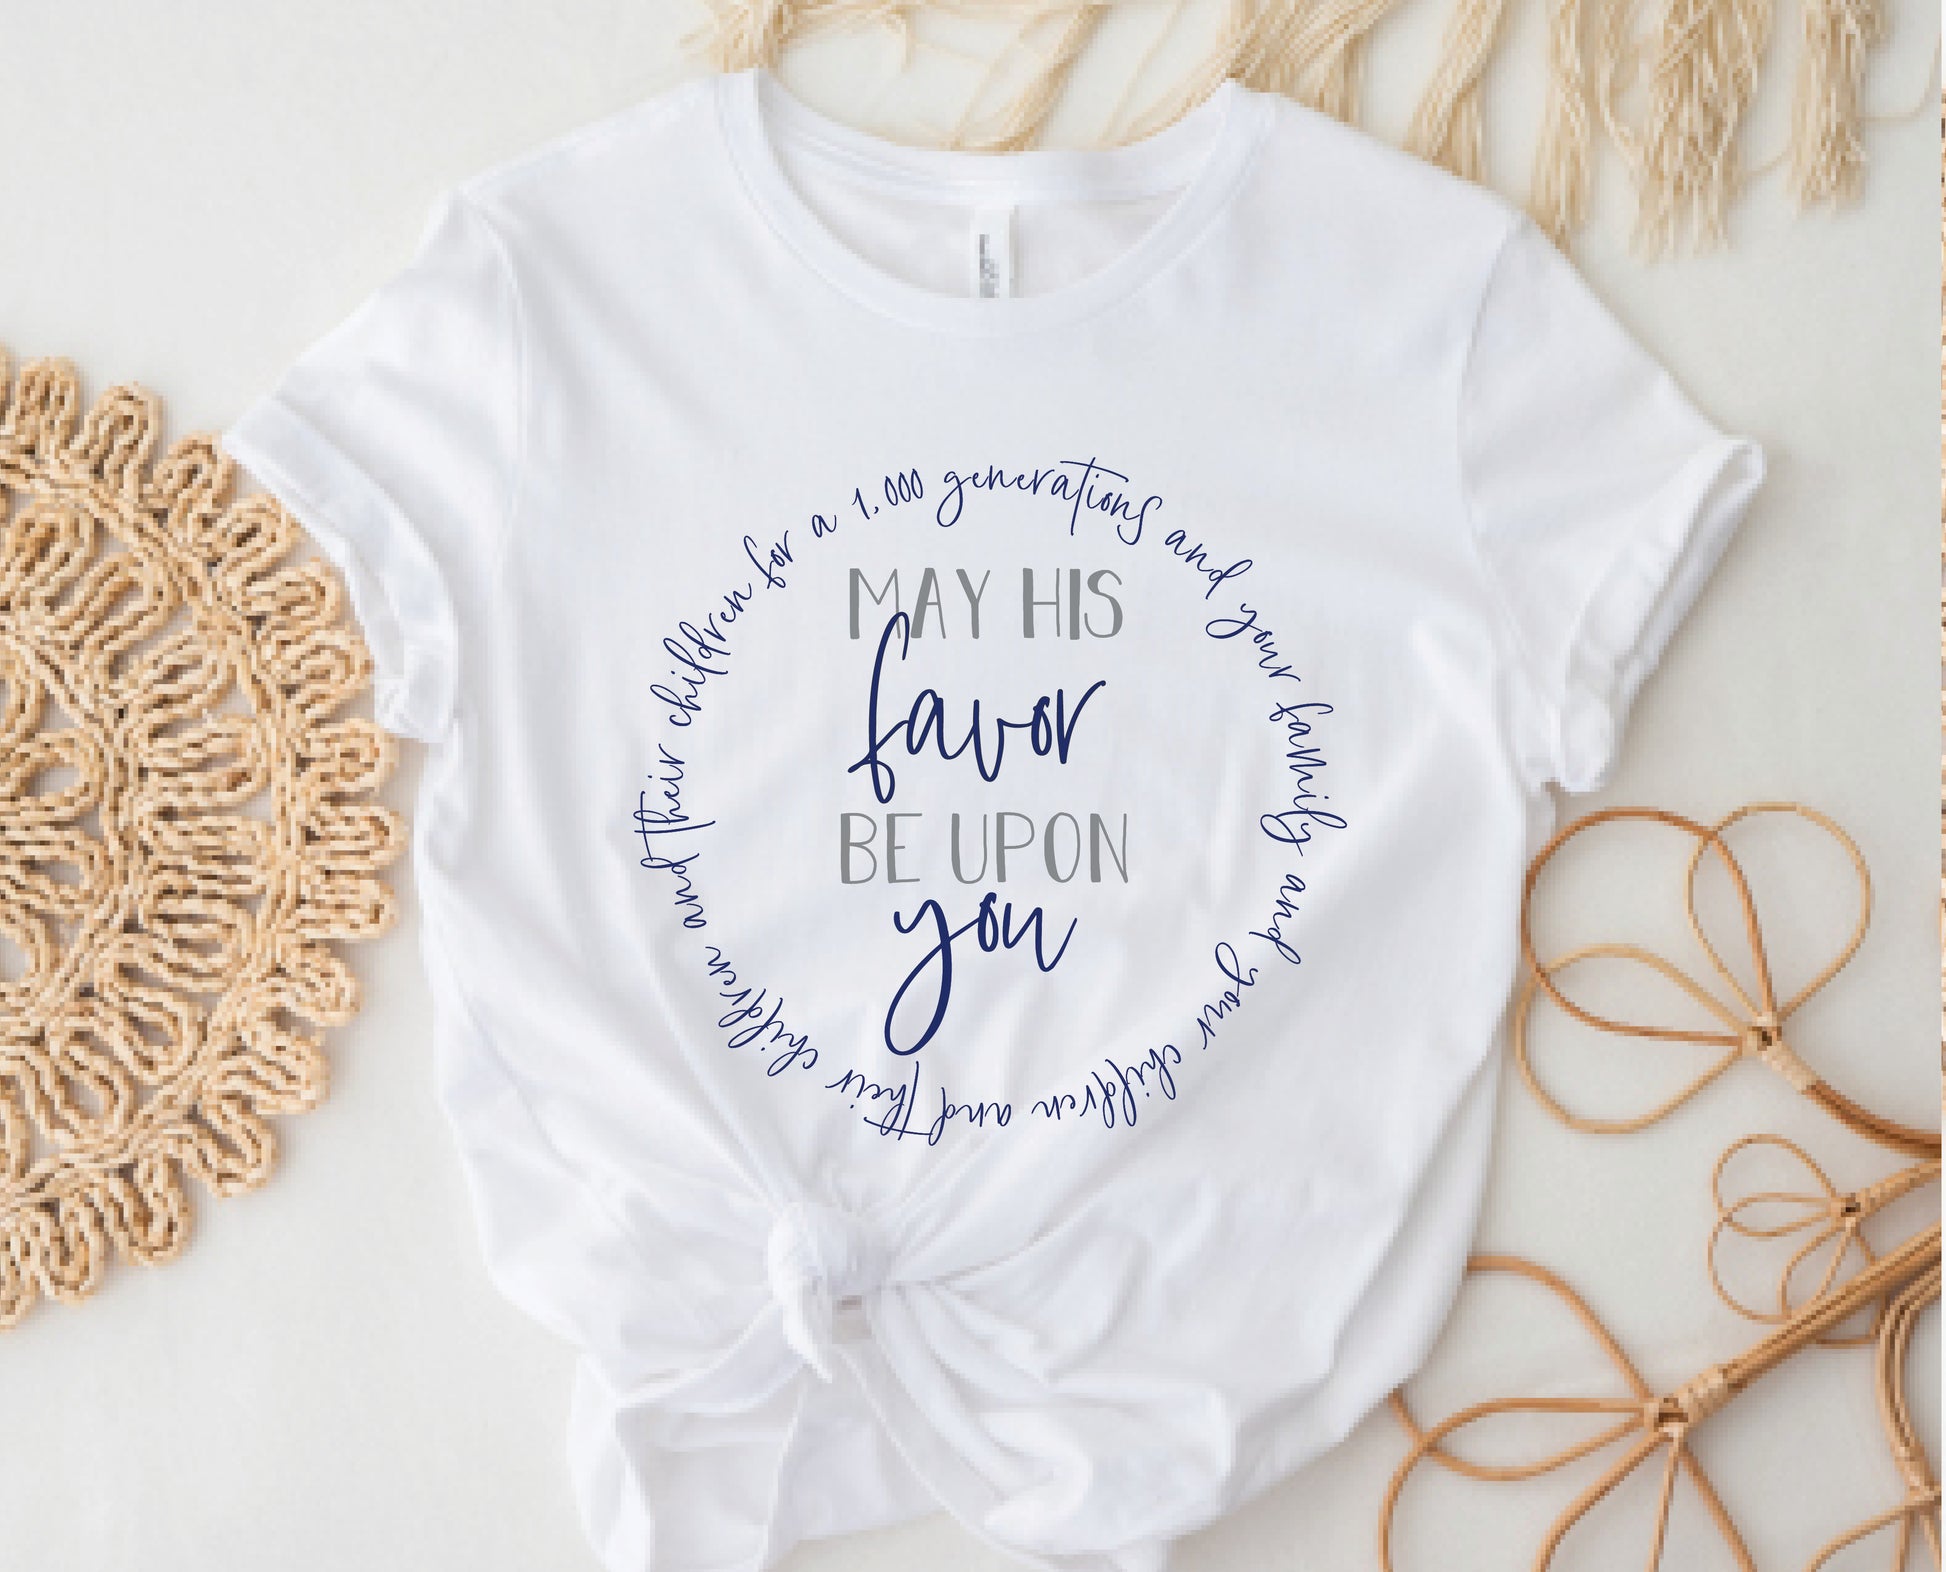 May His Favor Be Upon You for a thousand generations family & children Numbers 6 The Blessing Christian aesthetic circle design printed on soft white t-shirt for women